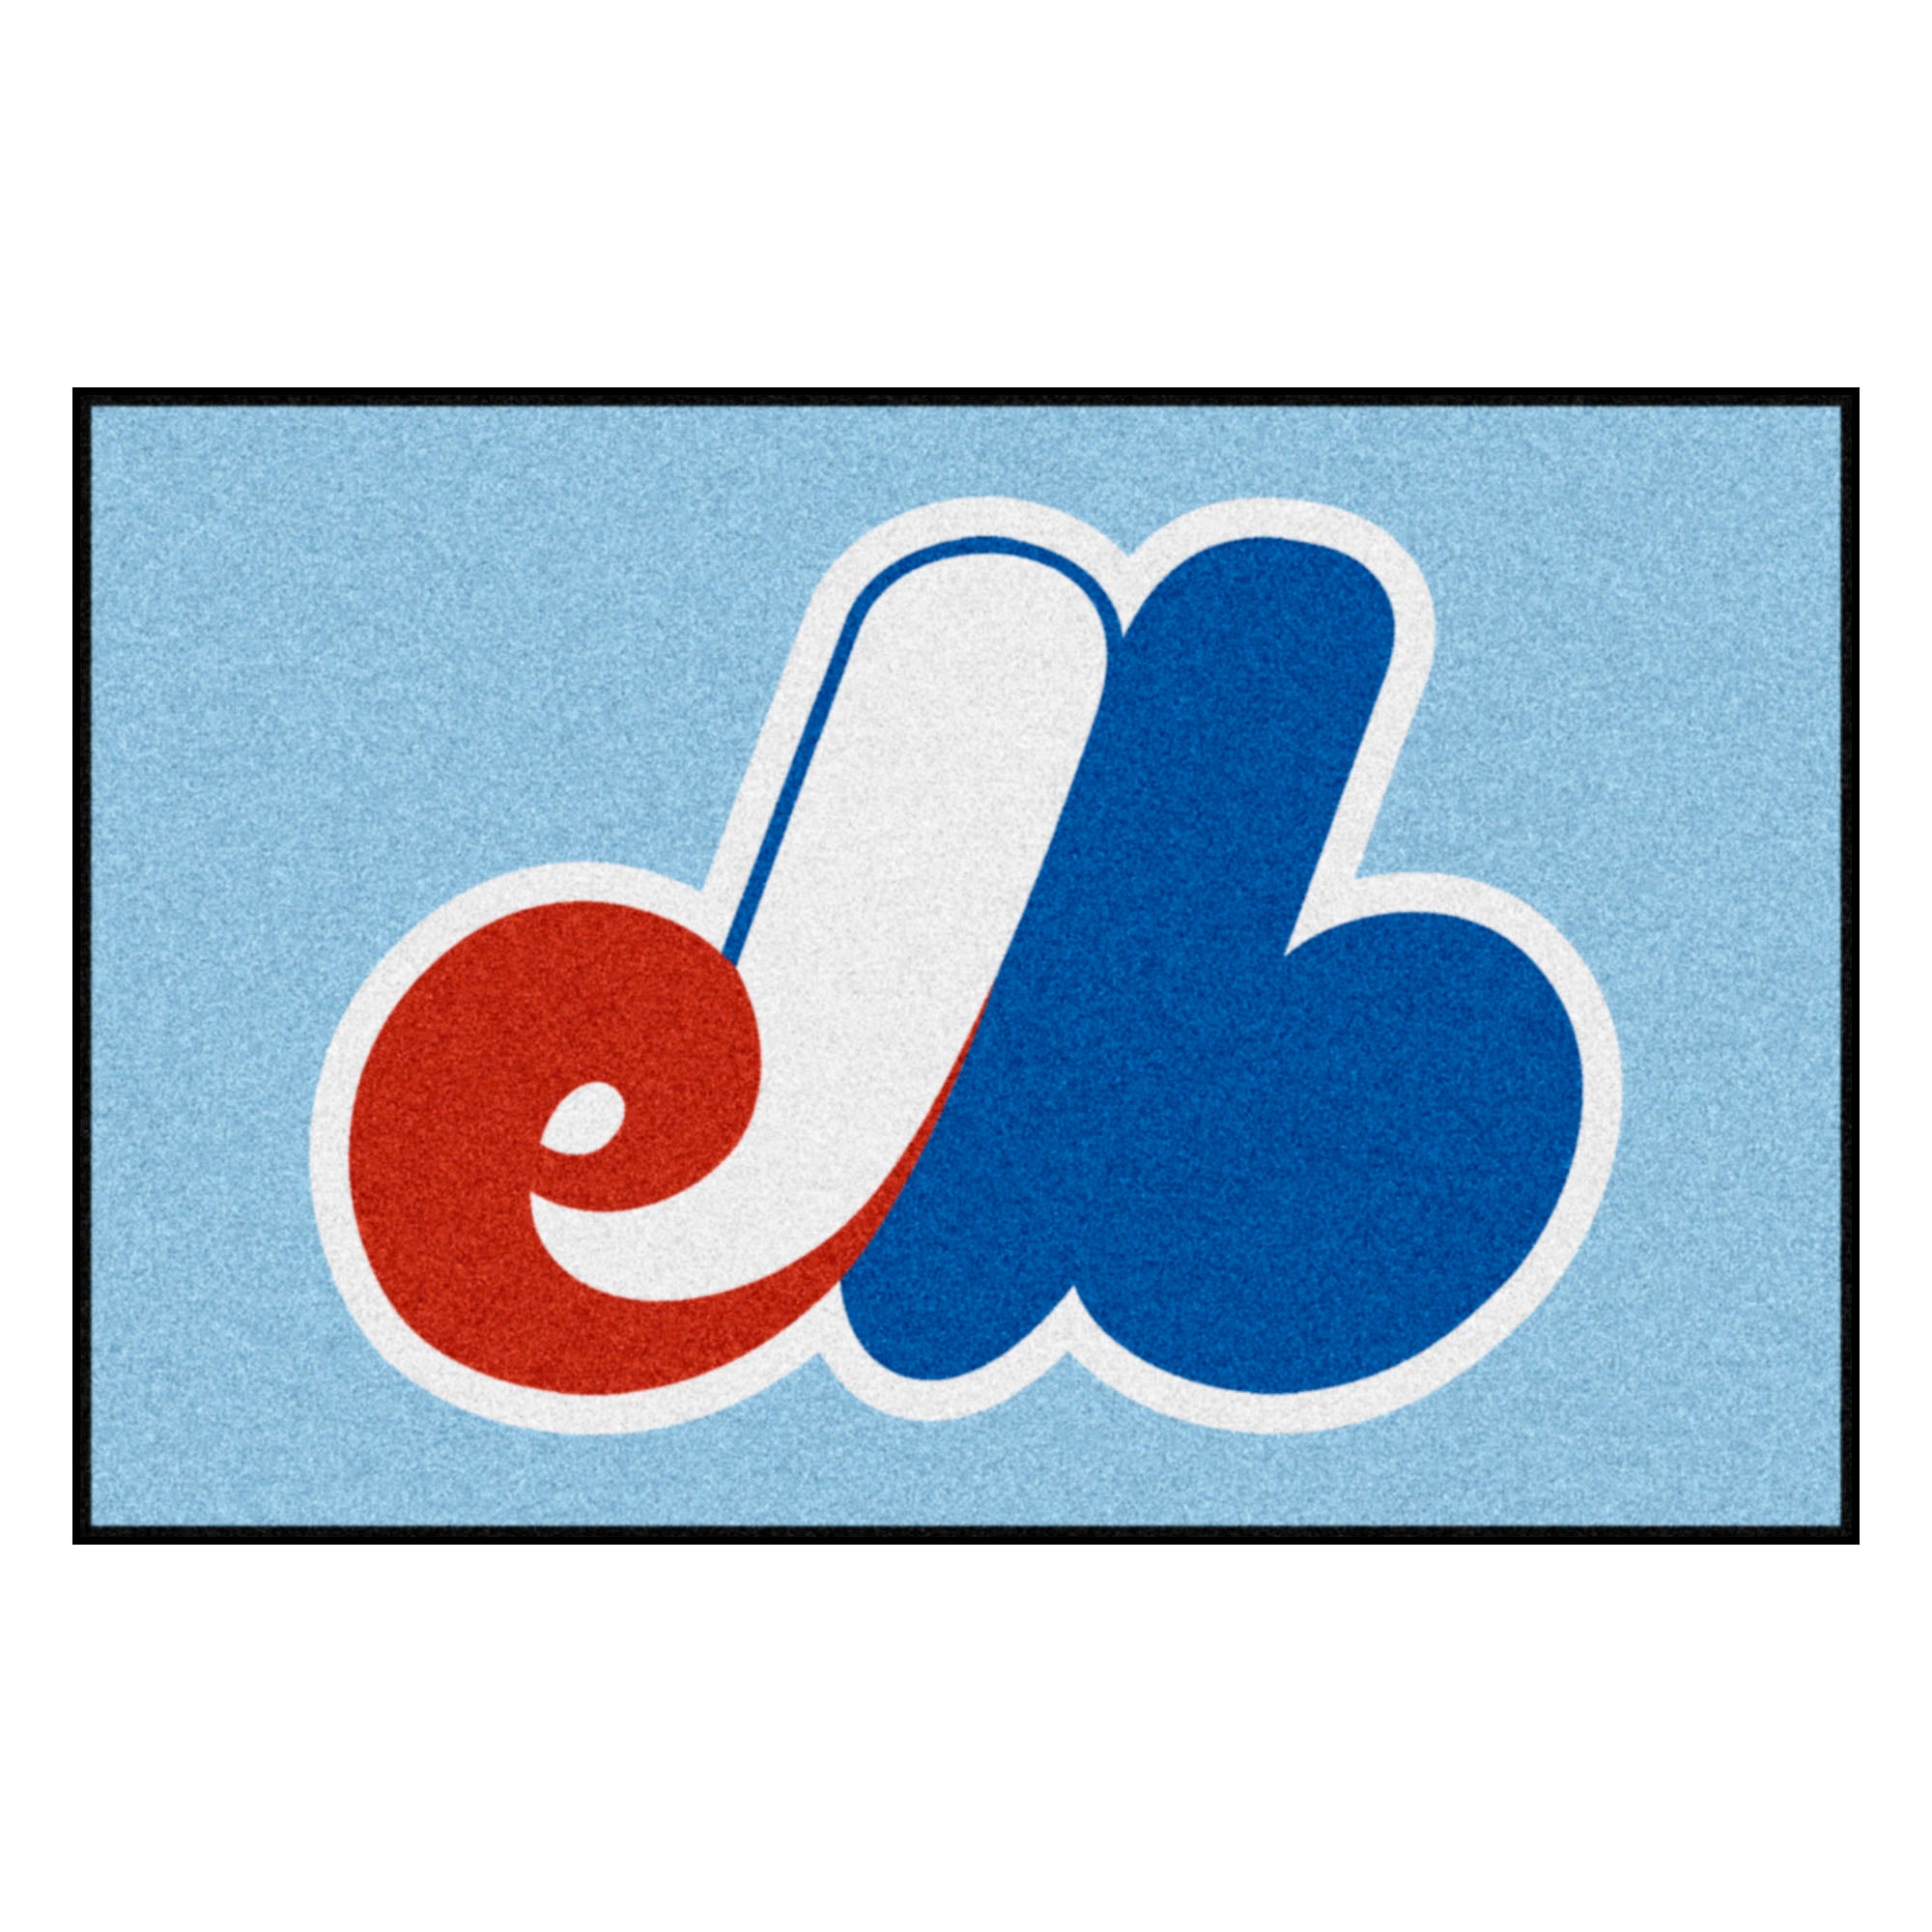 FANMATS, MLB - Washington Nationals Retro Collection Rug - 19in. x 30in. - (1990 Montreal Expos)